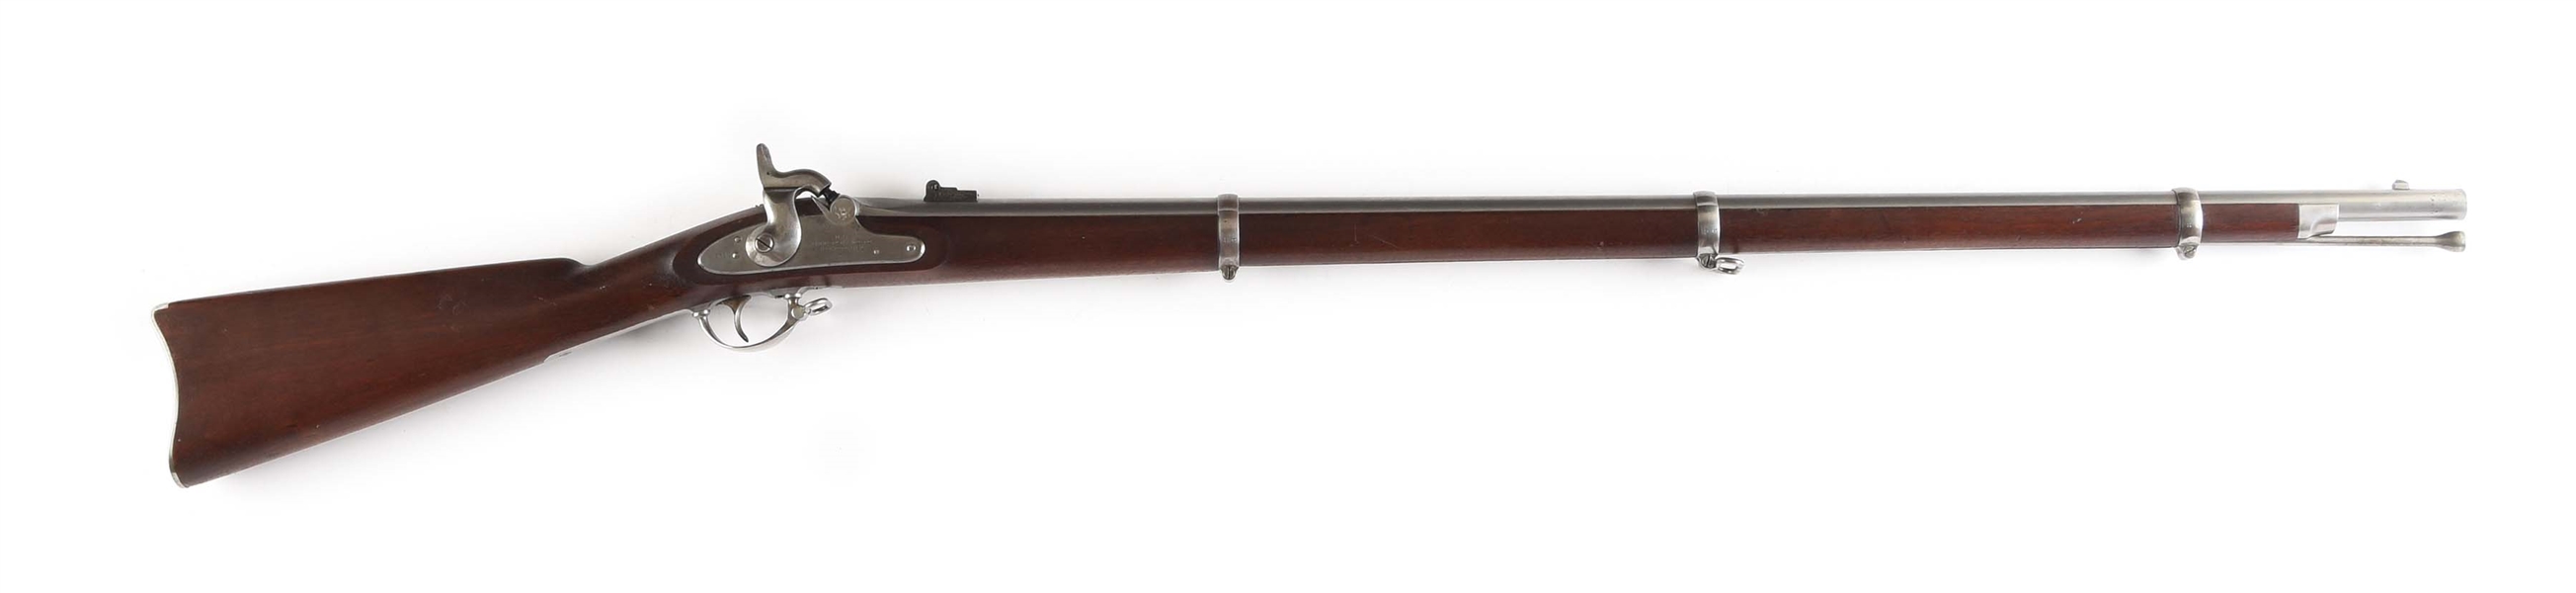 (A) UNISSUED COLT PERCUSSION RIFLE DATED 1863.